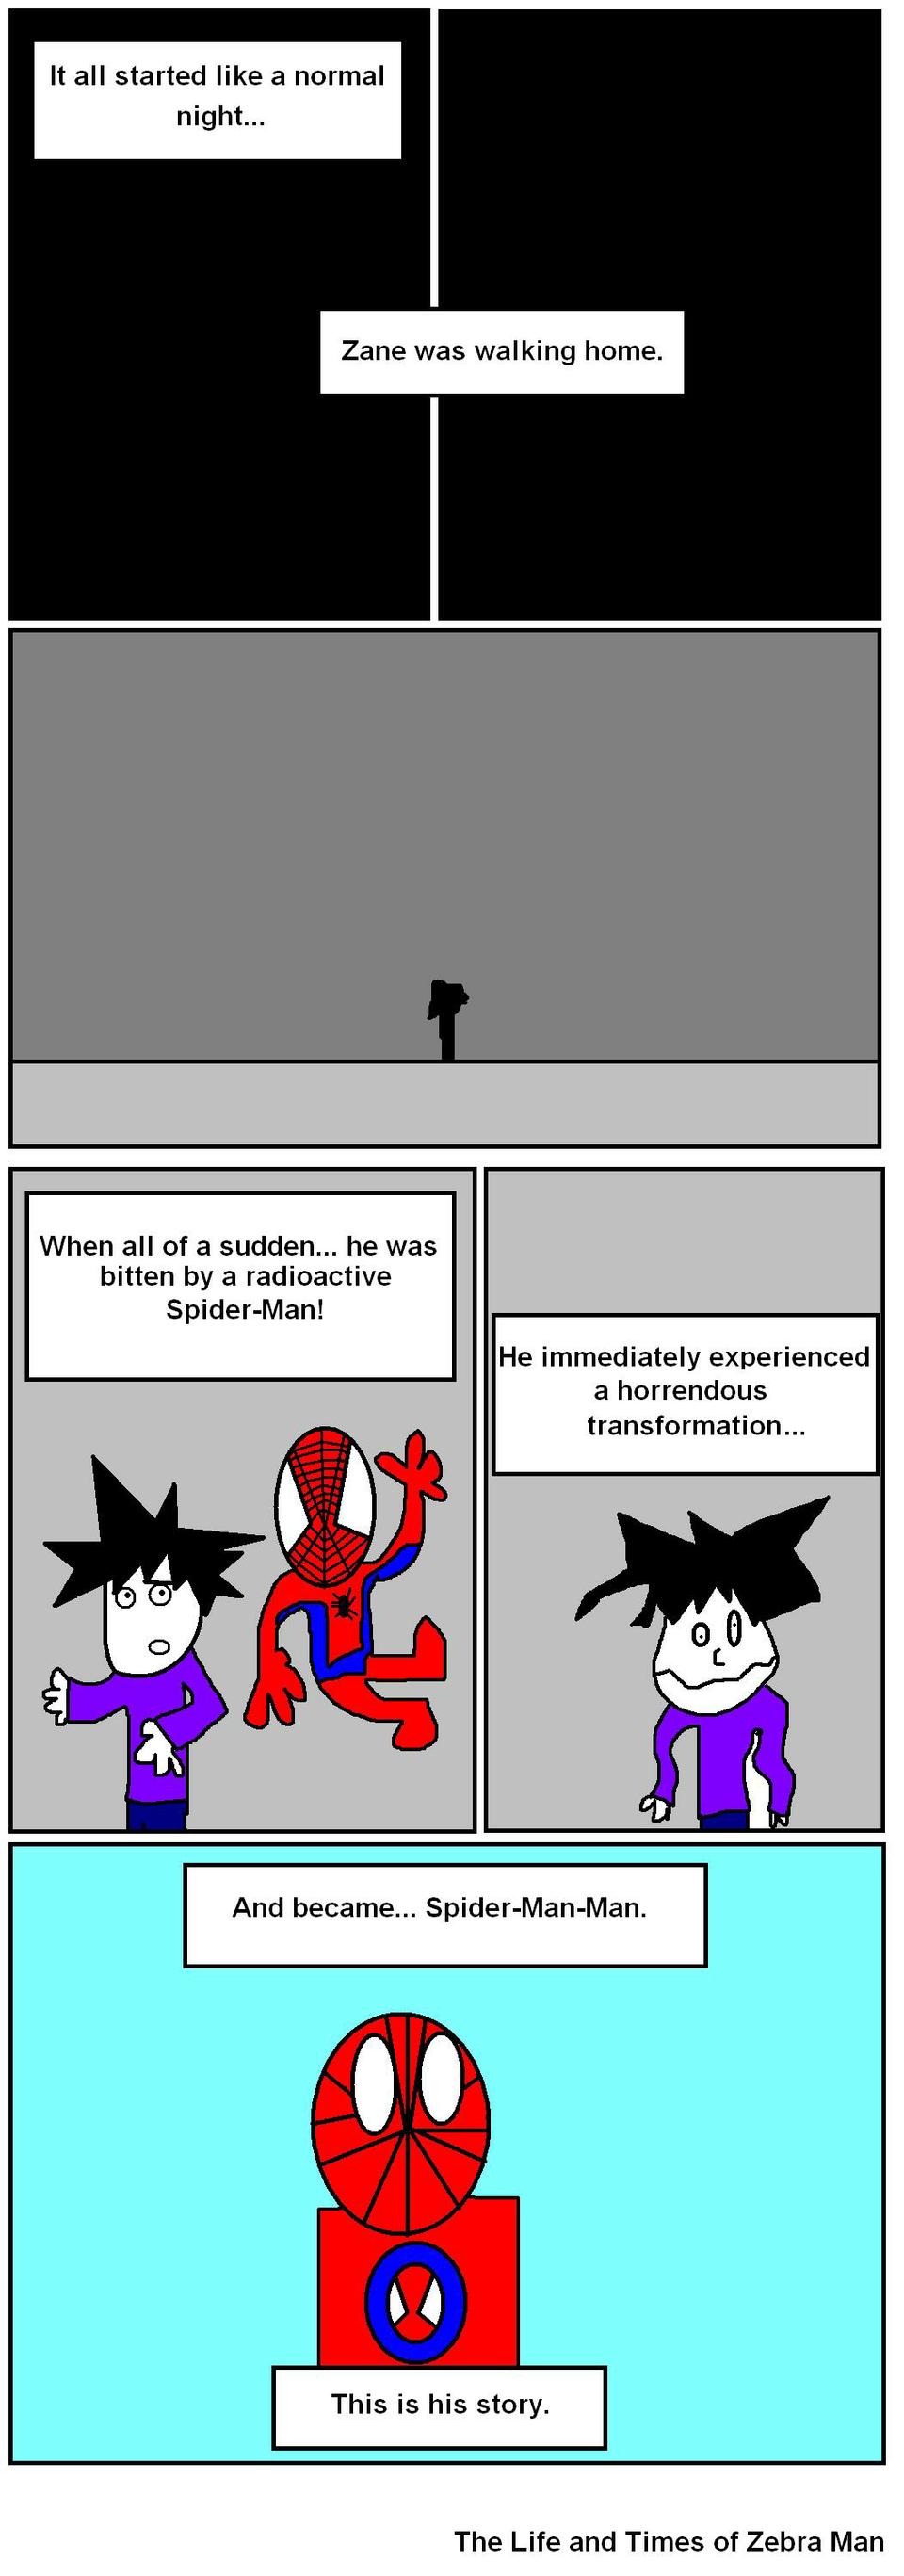 The Adventures of Spider-Man-Man: ONE